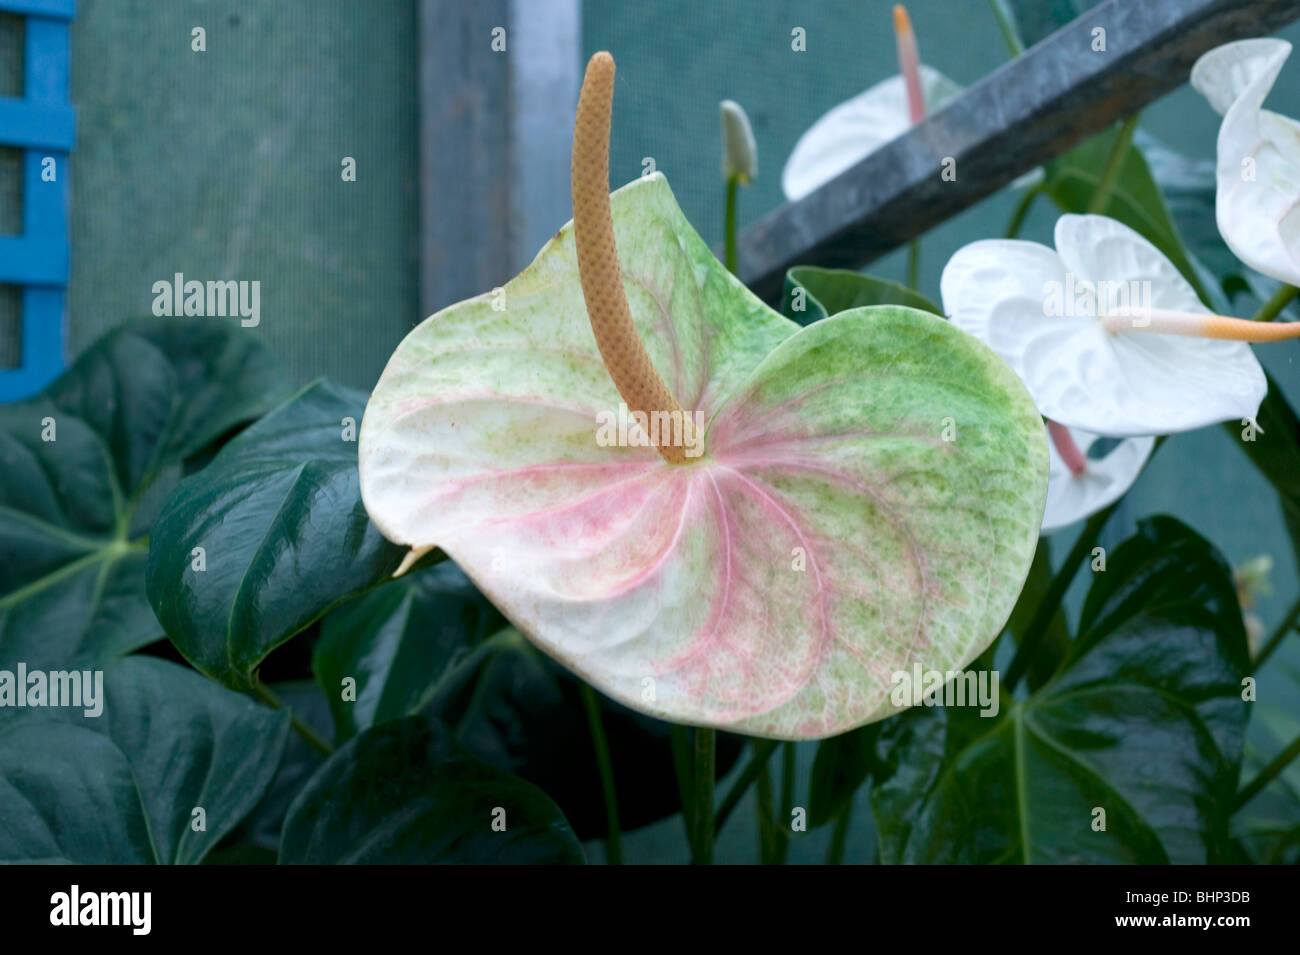 Anthurium Andreanum. A pretty multicolour flower of green & white with pink veins & a light brown pistel. Stock Photo